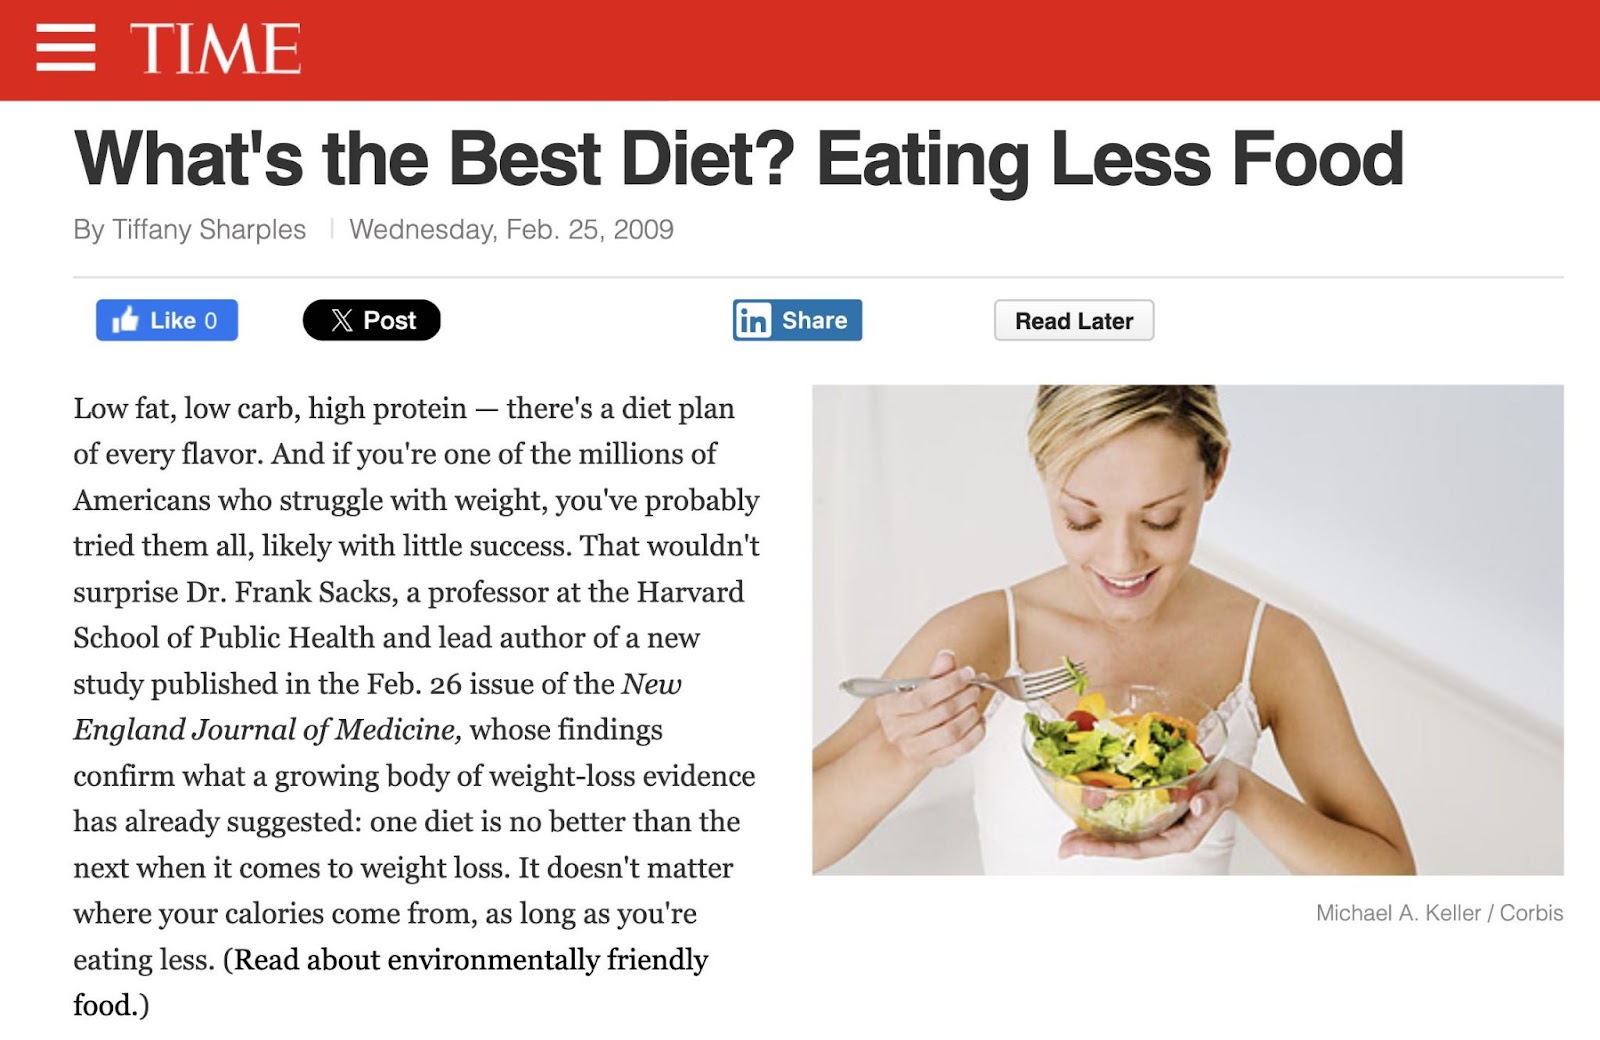 TIME Magazine article on the best diet advice